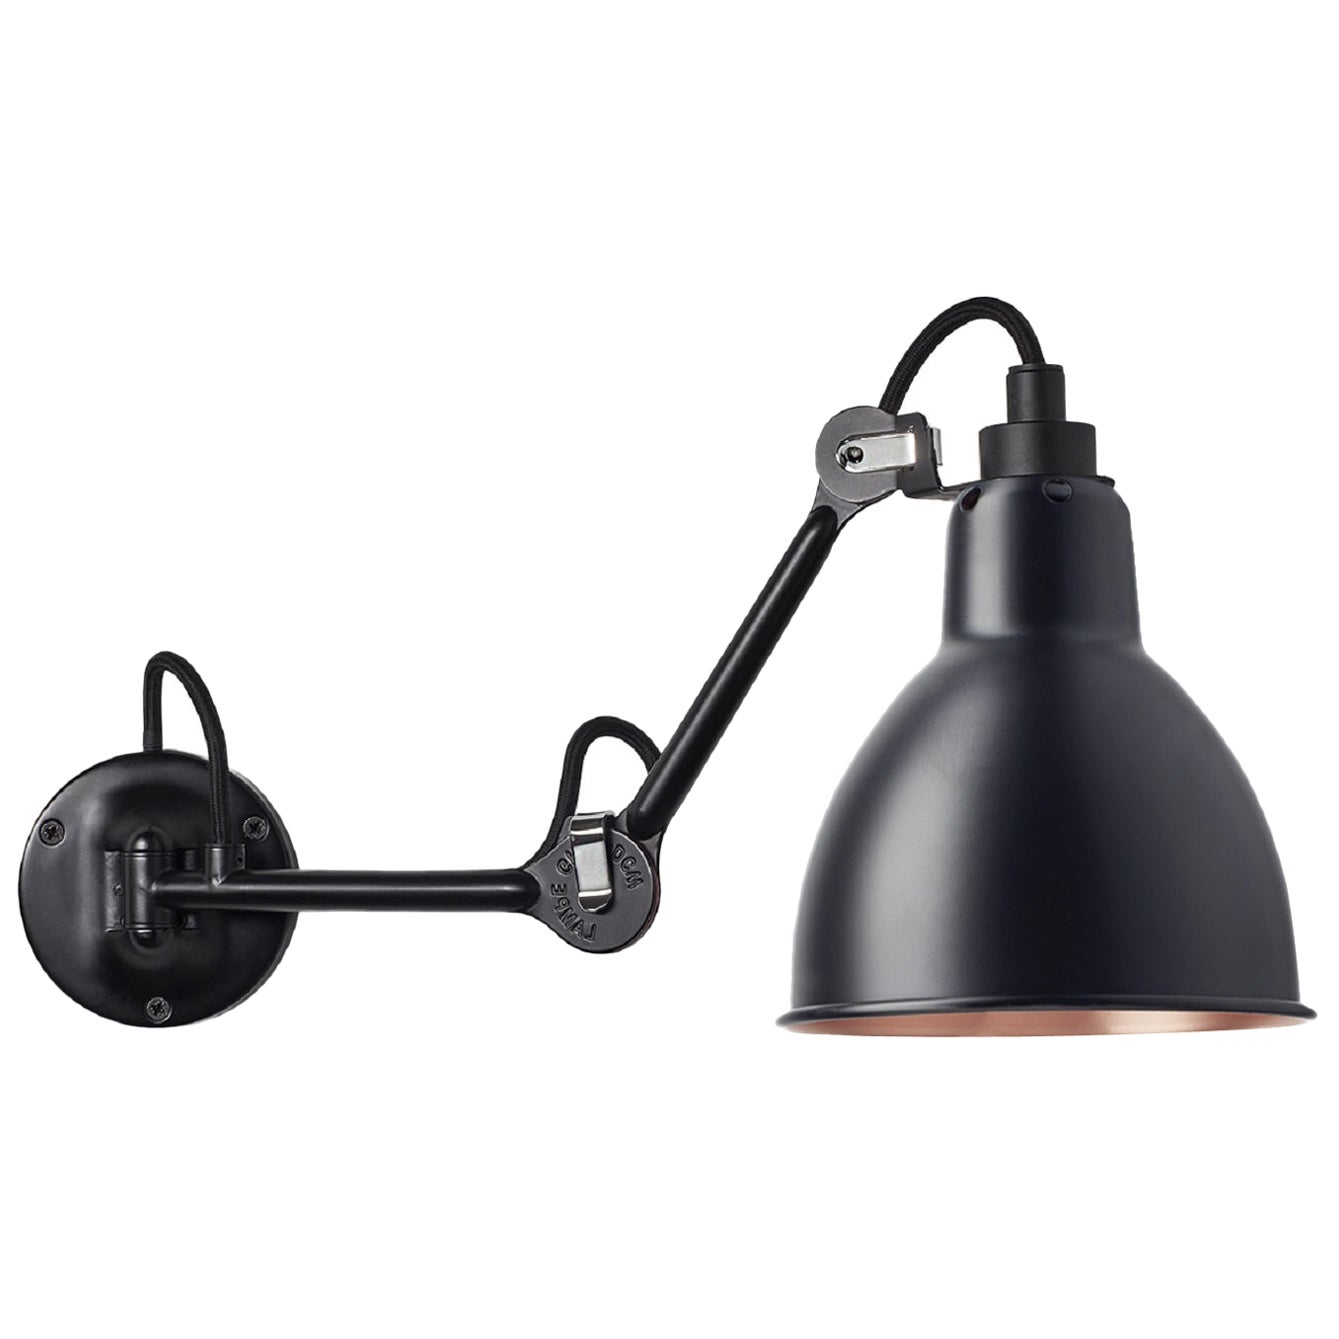 DCW Editions La Lampe Gras N°204 Wall Lamp in Black Arm & Black Copper Shade For Sale